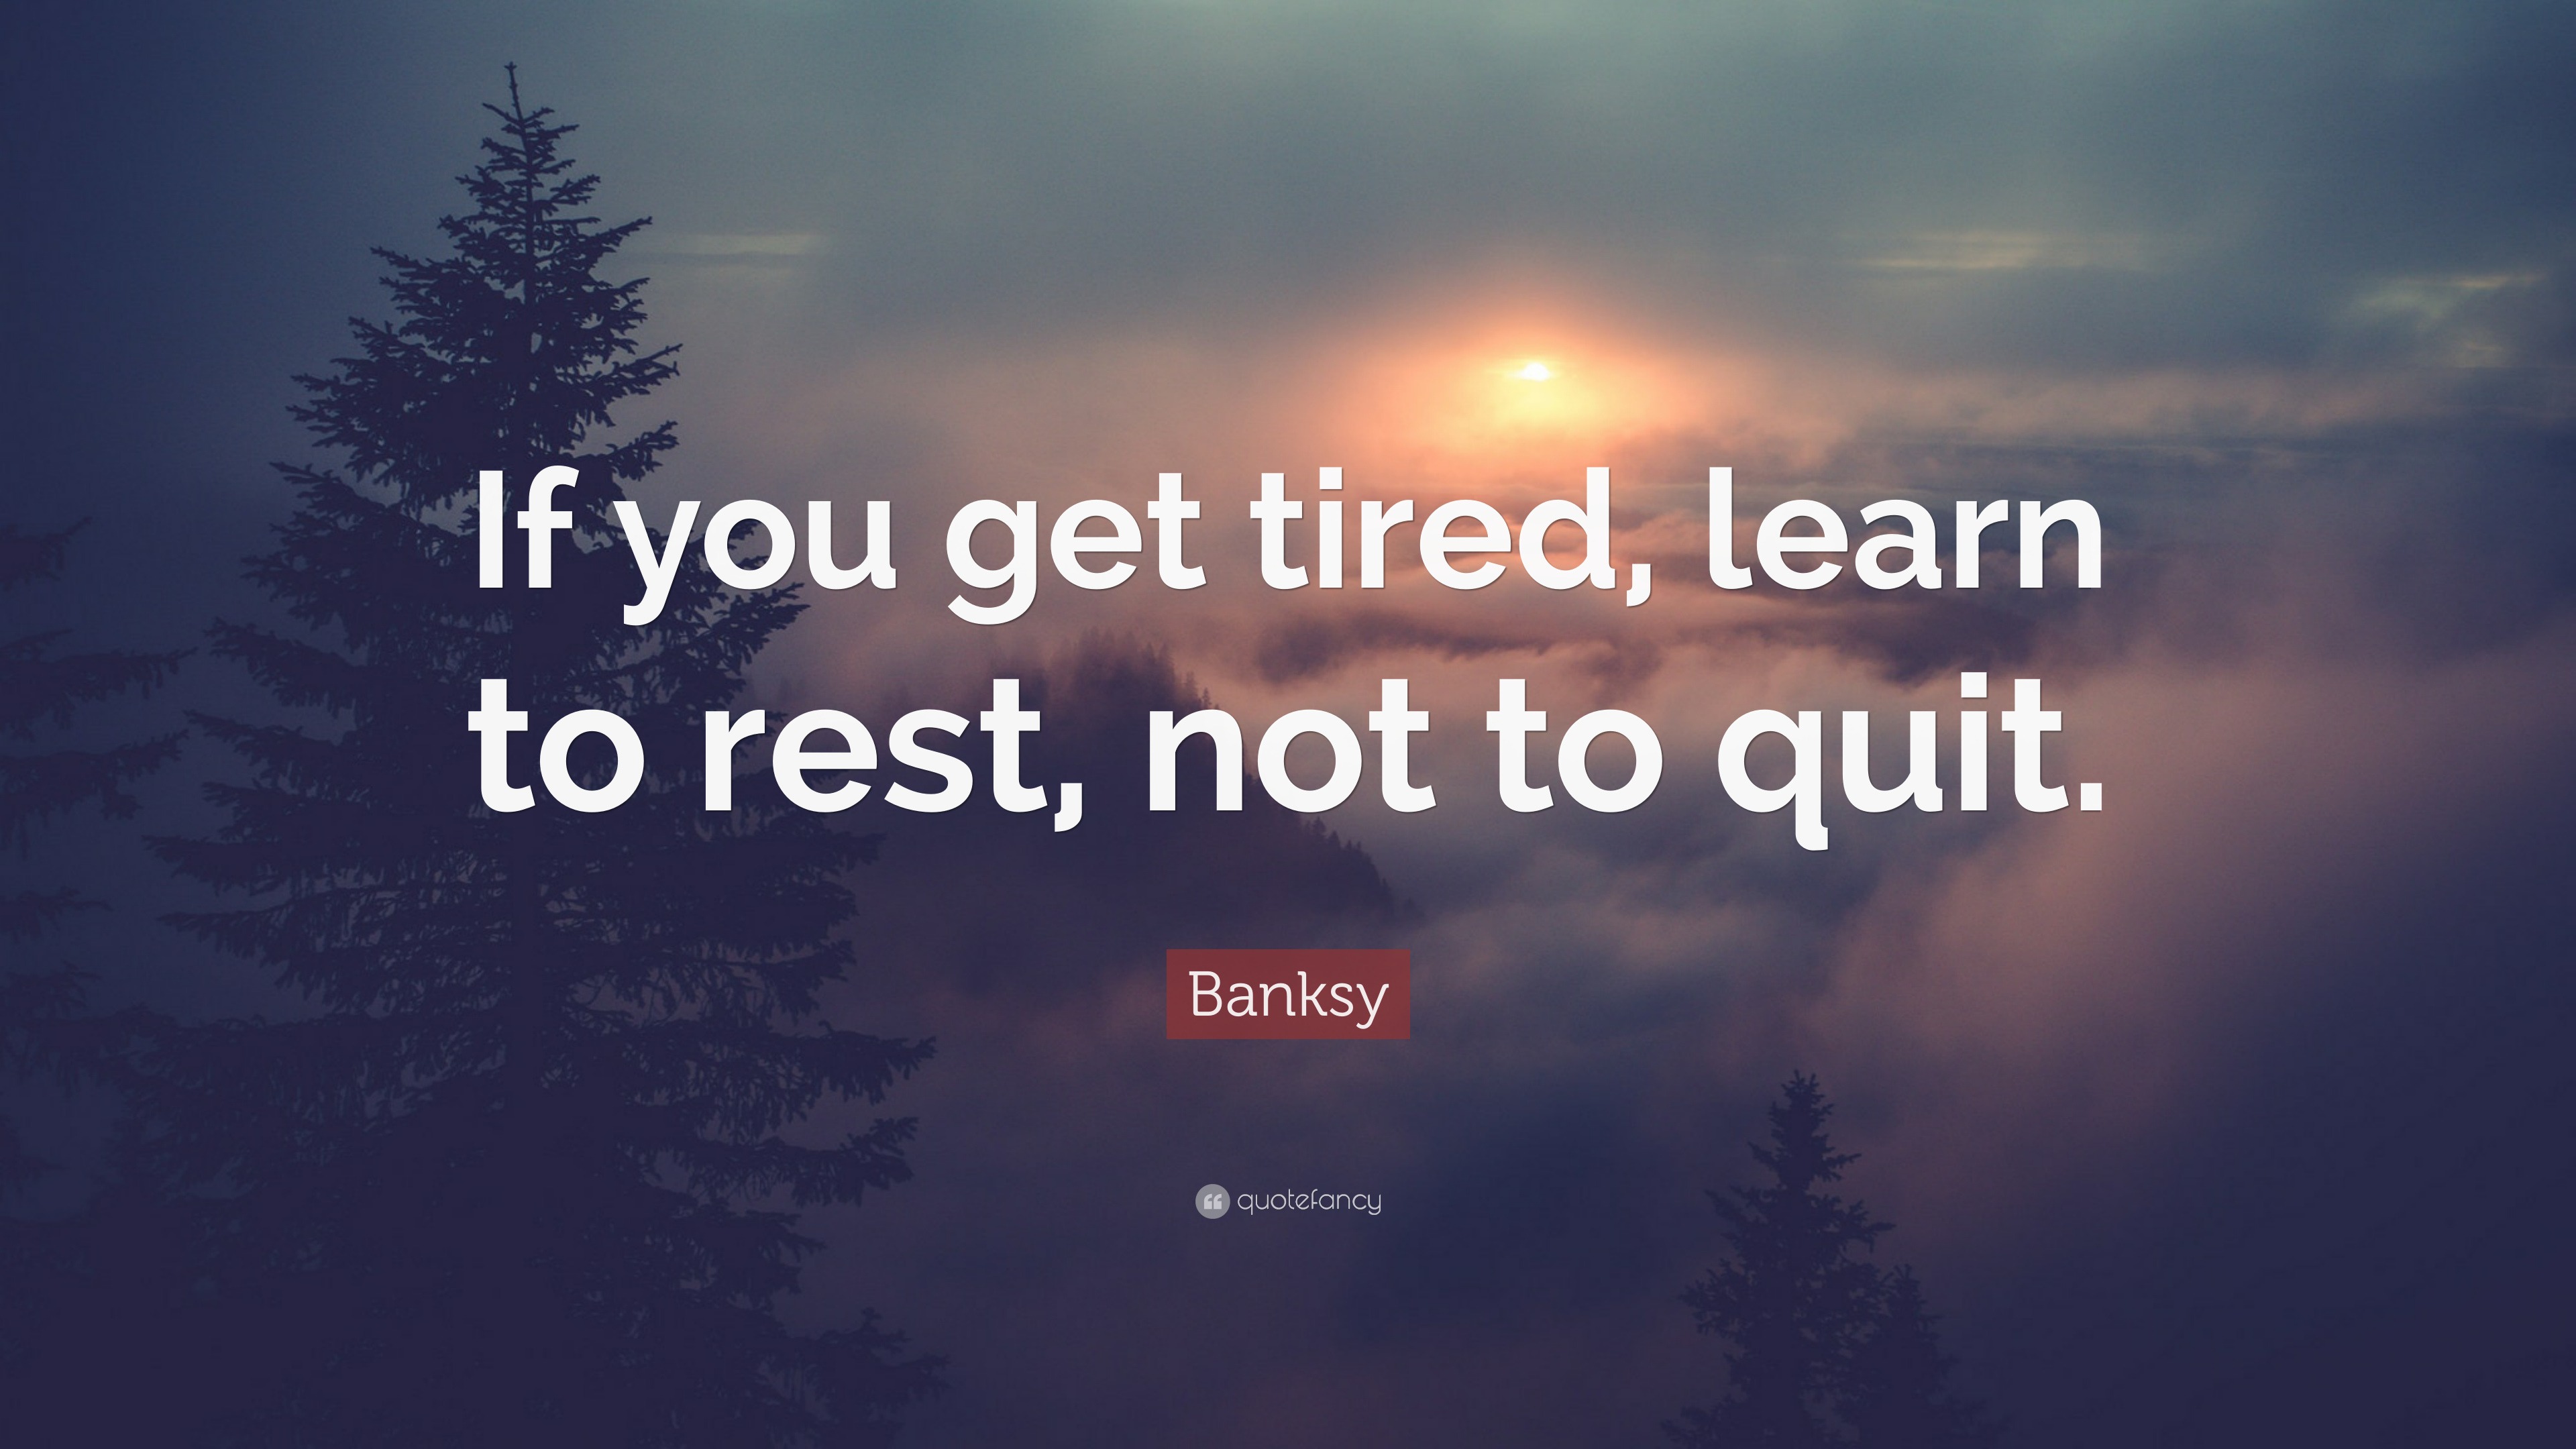 Banksy Quote: “If You Get Tired, Learn To Rest, Not To Quit.”